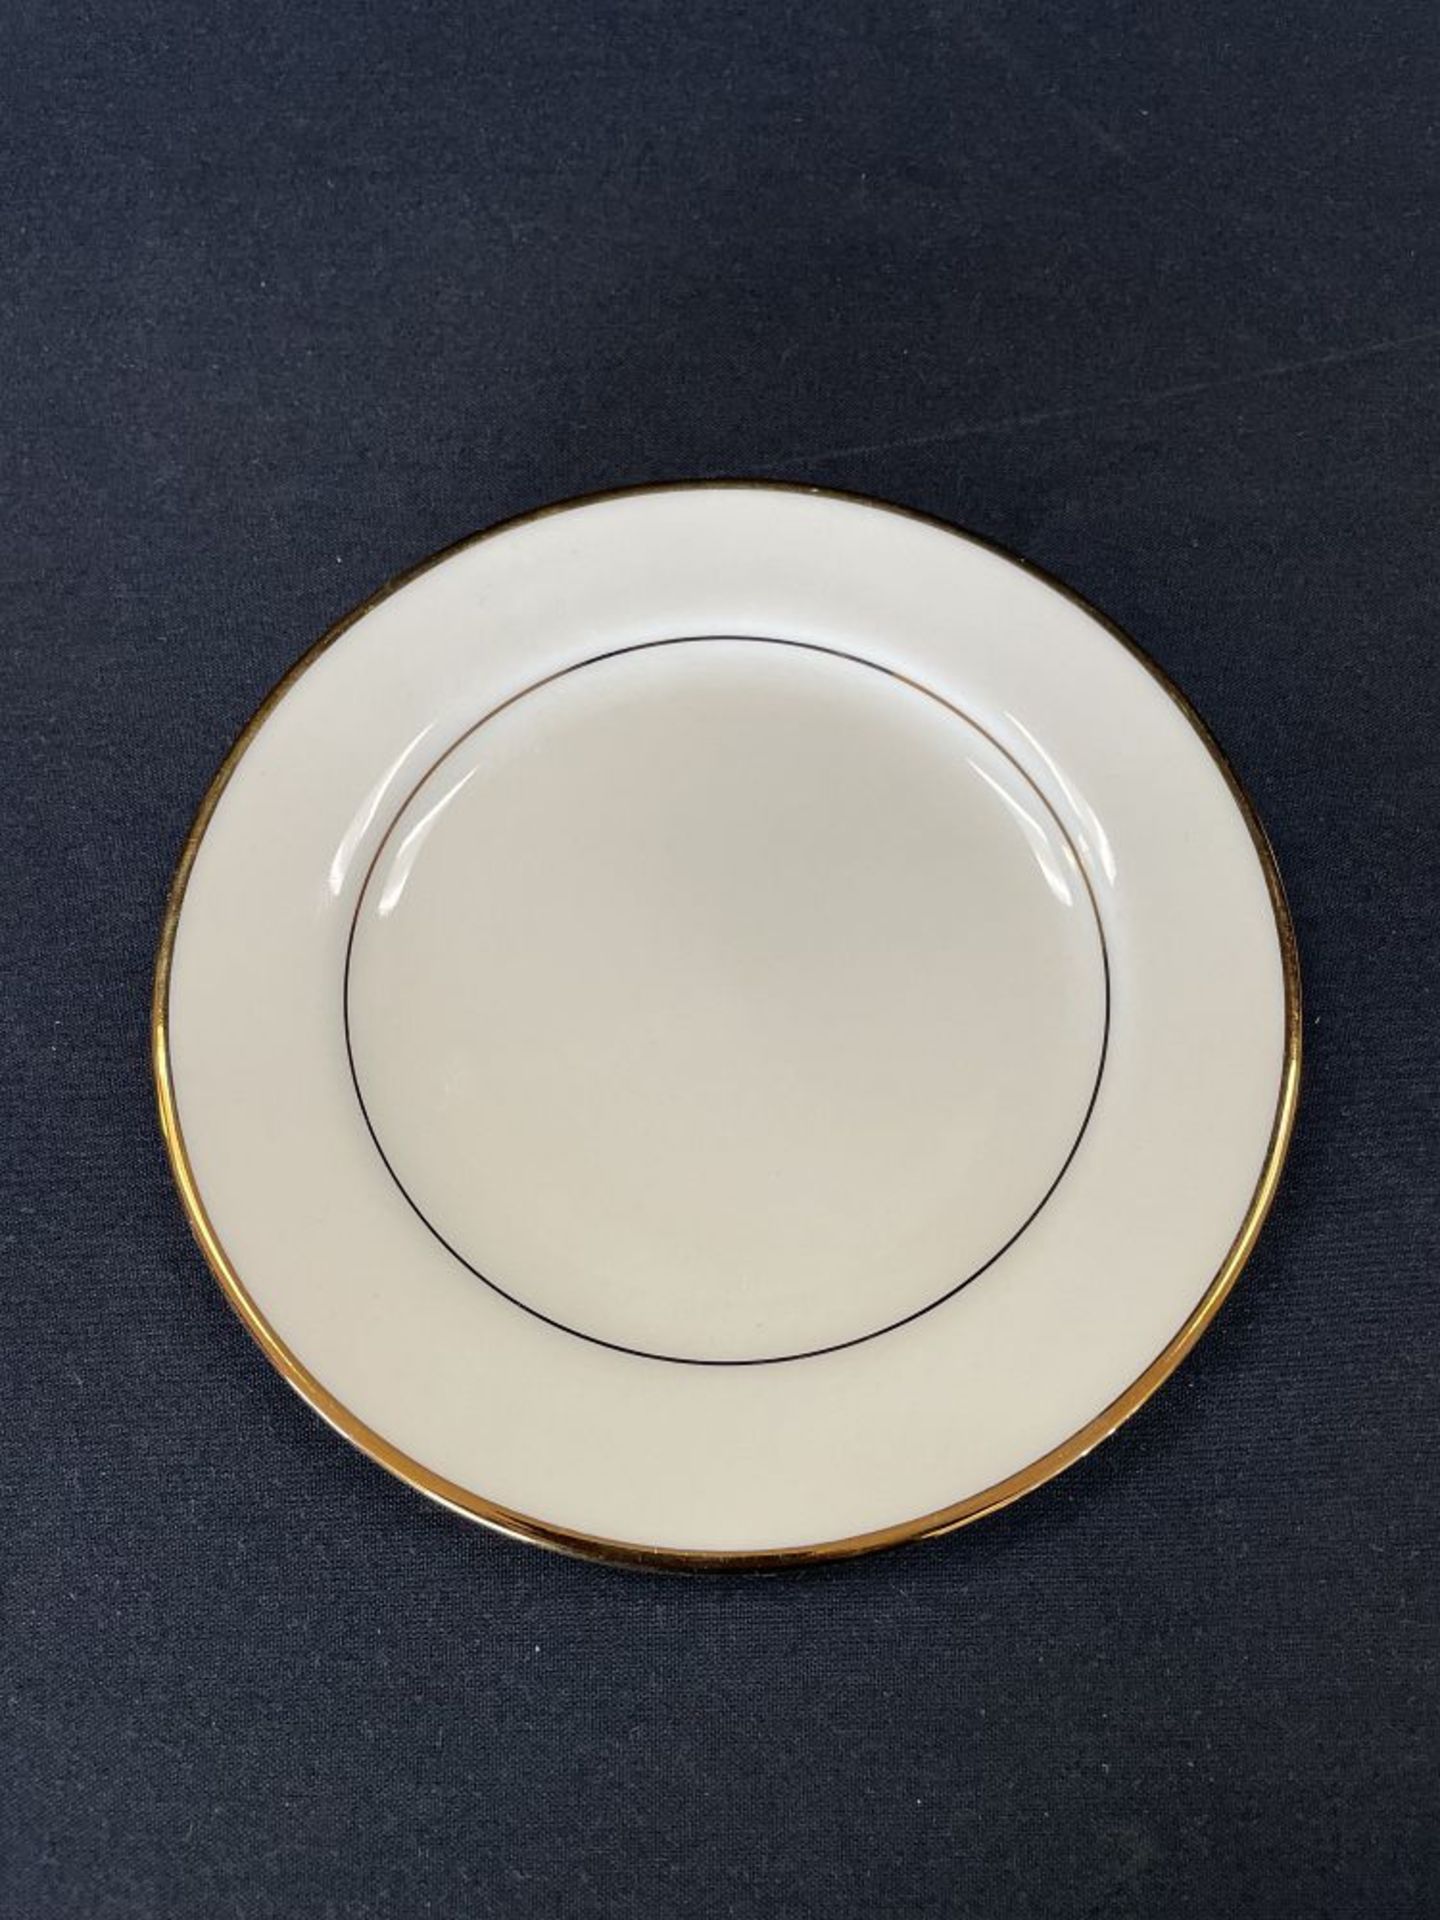 8" Plate, Knowles